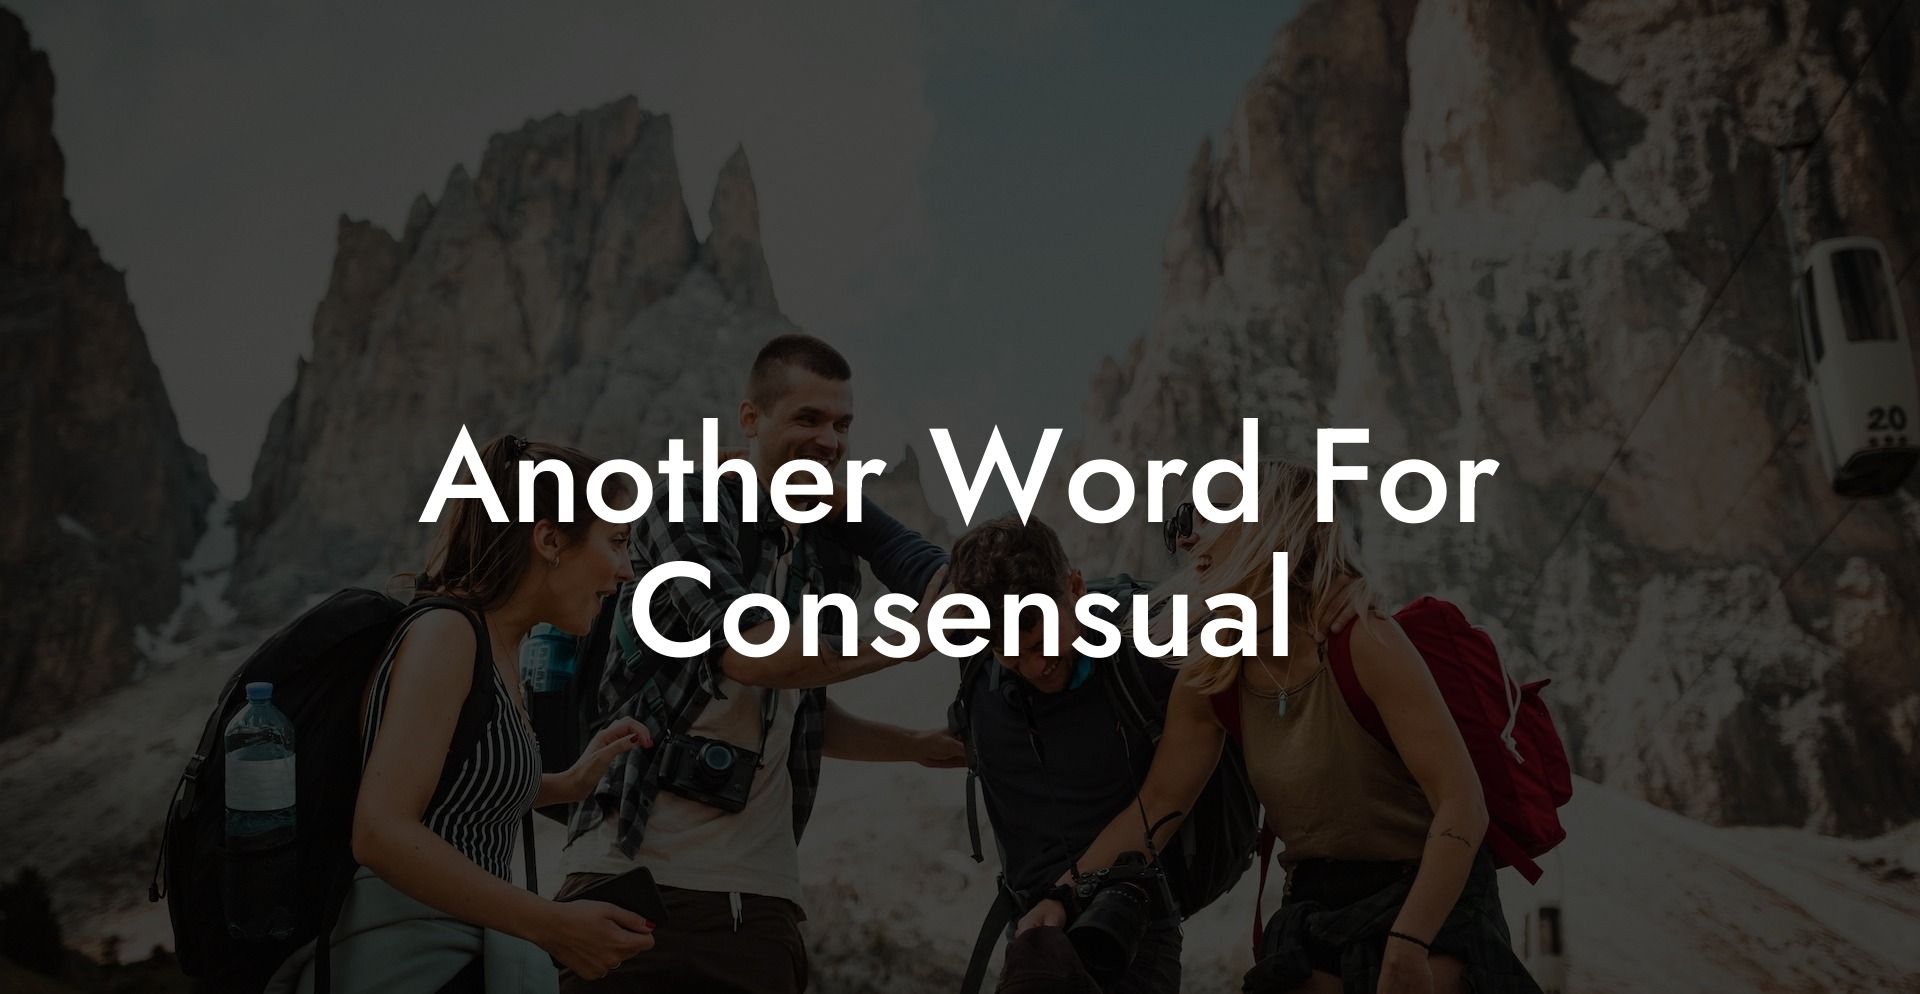 Another Word For Consensual